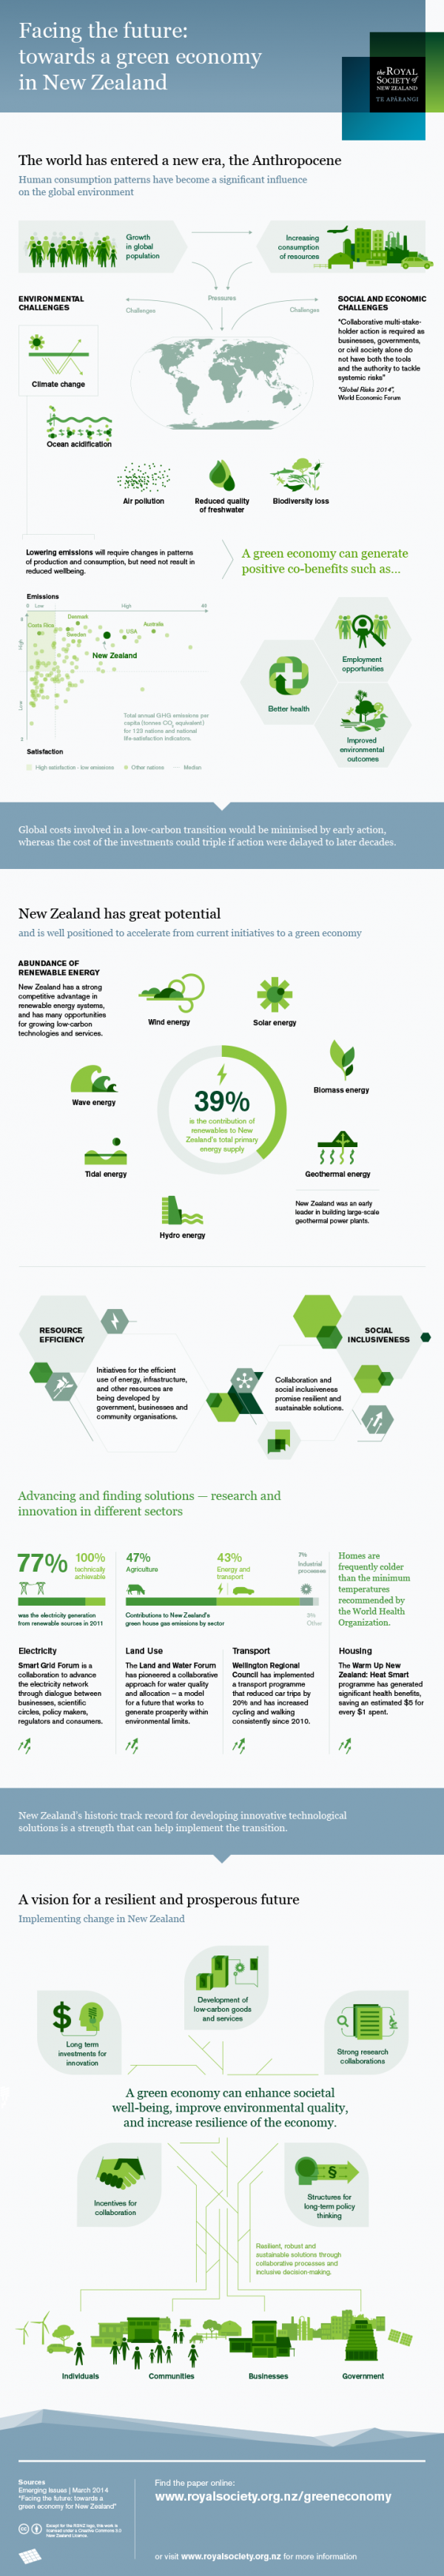 Green economy infographic RSNZ updated